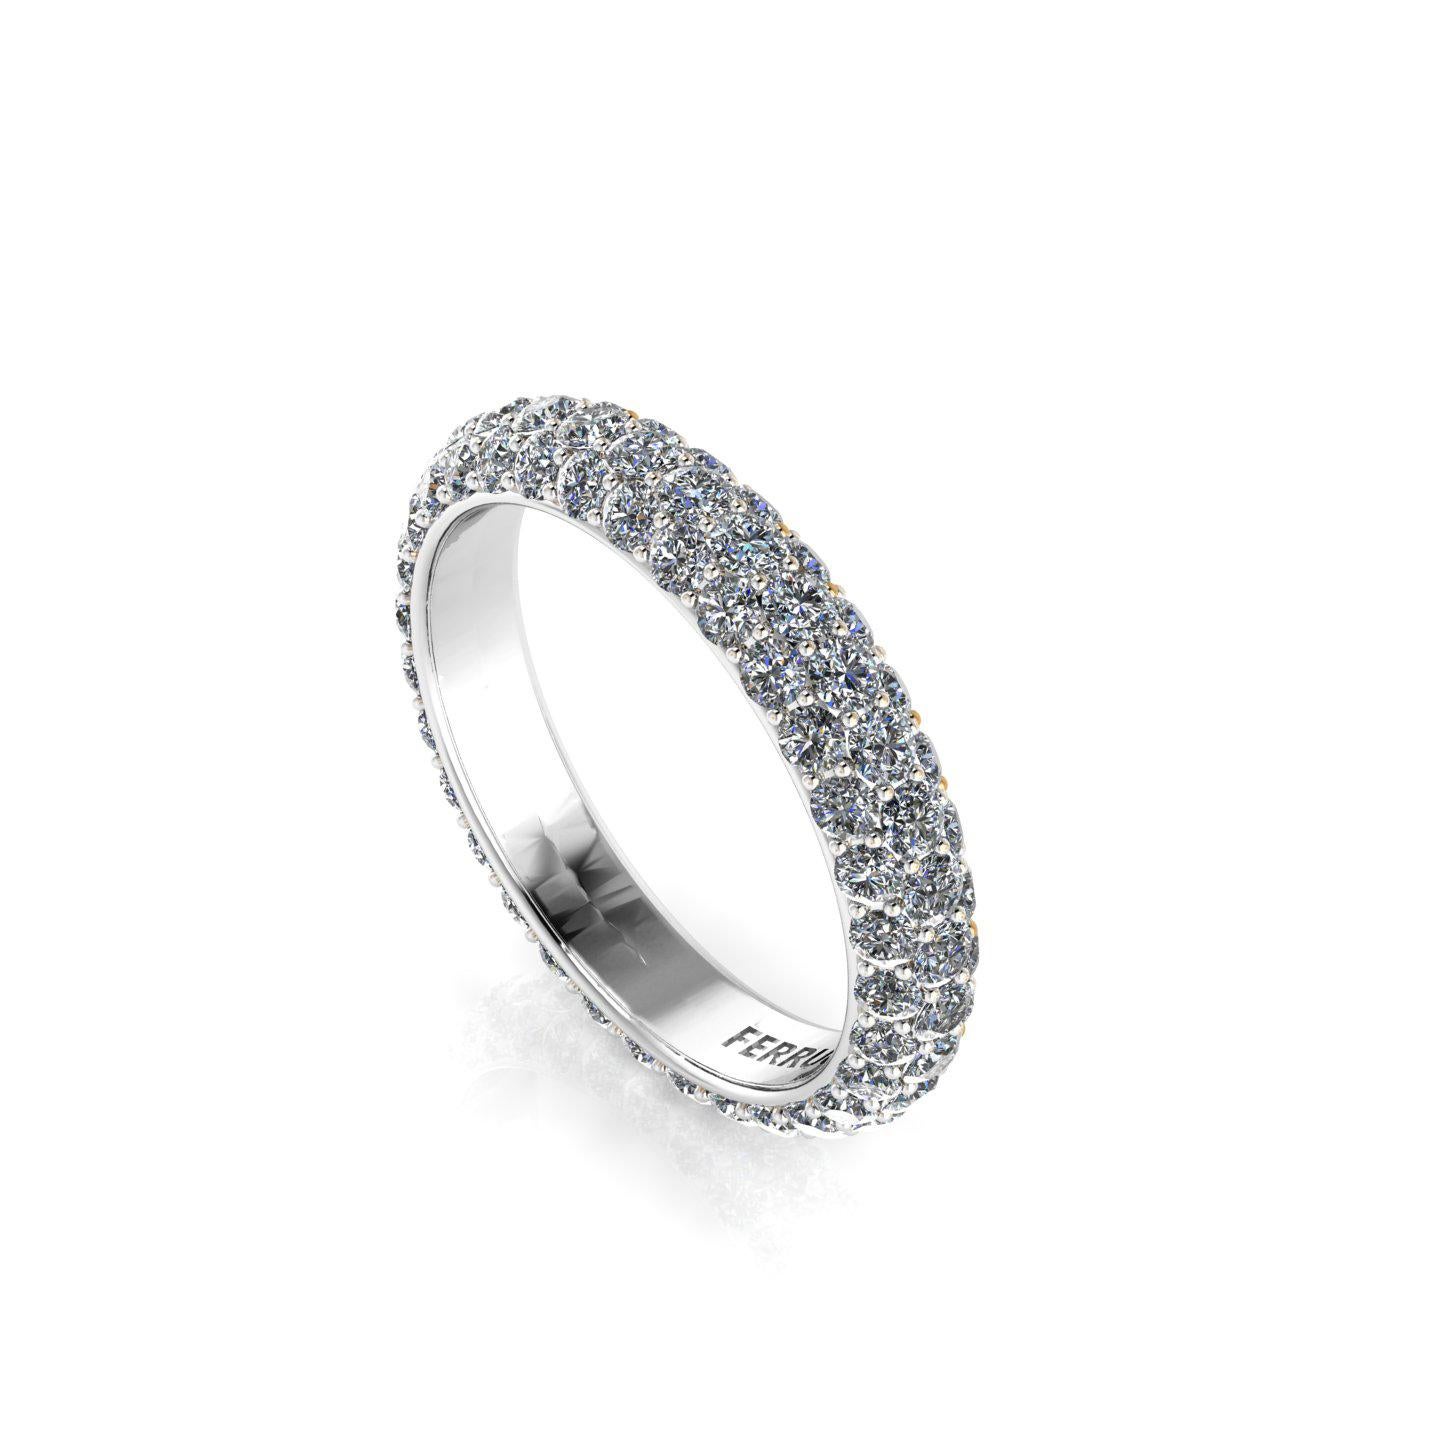 FERRUCCI diamond pave' band, a wrap of sparkling white diamonds, G color, VS/SI+ clarity, for an approximate total carat weight of 2.00 carat, hand made in New York City with the best Italian craftsmanship, conceived in 18k white gold.
Classic,